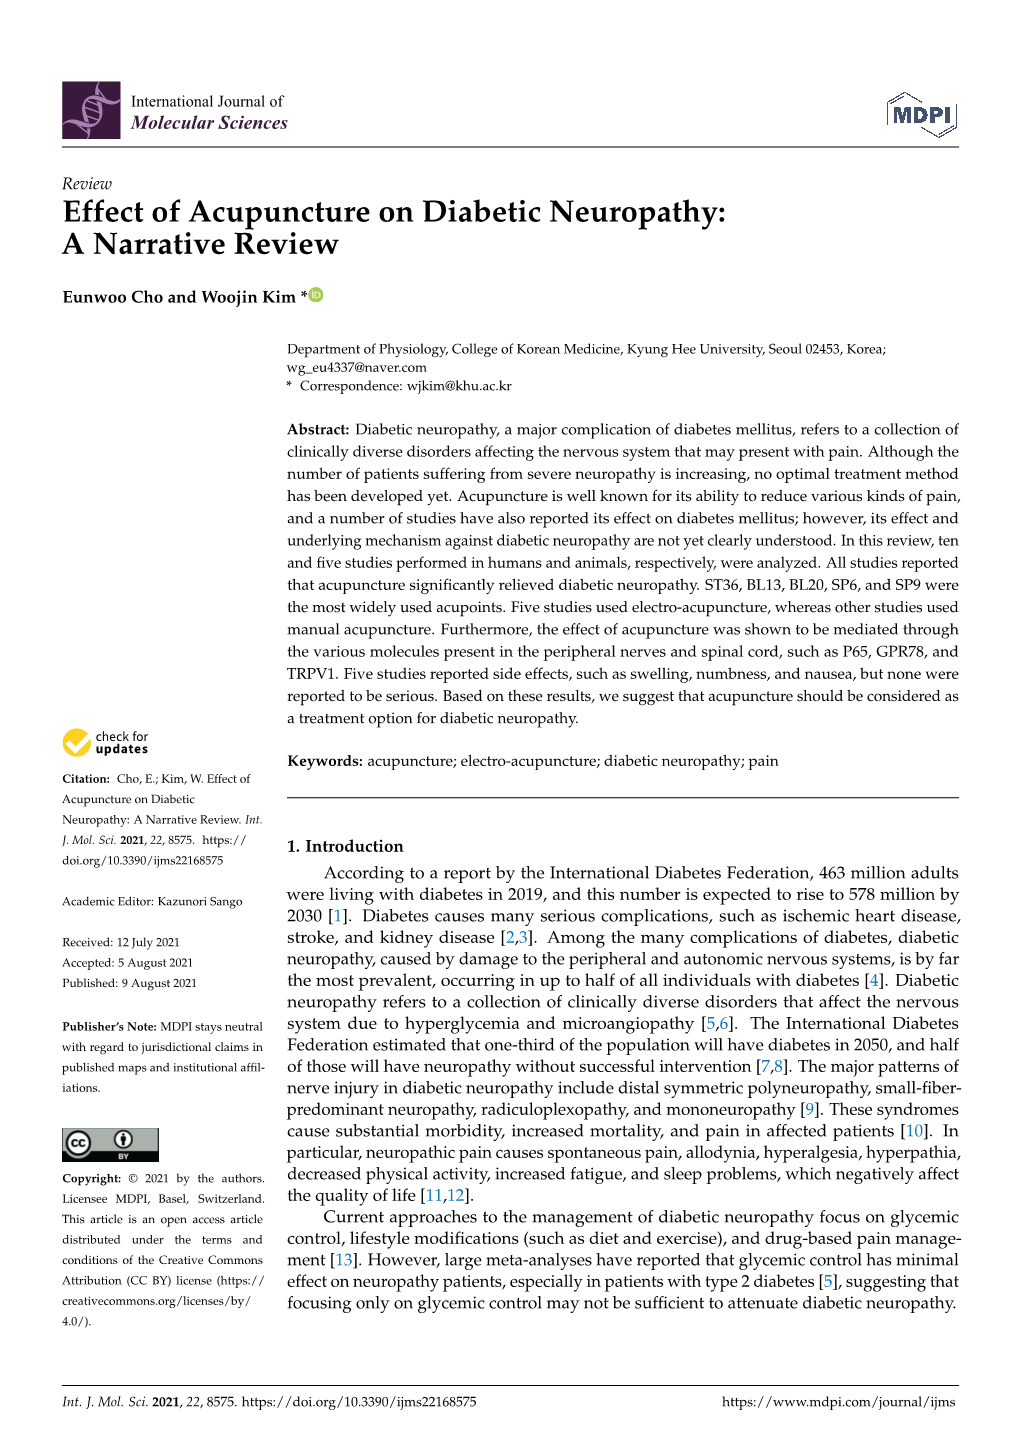 Effect of Acupuncture on Diabetic Neuropathy: a Narrative Review